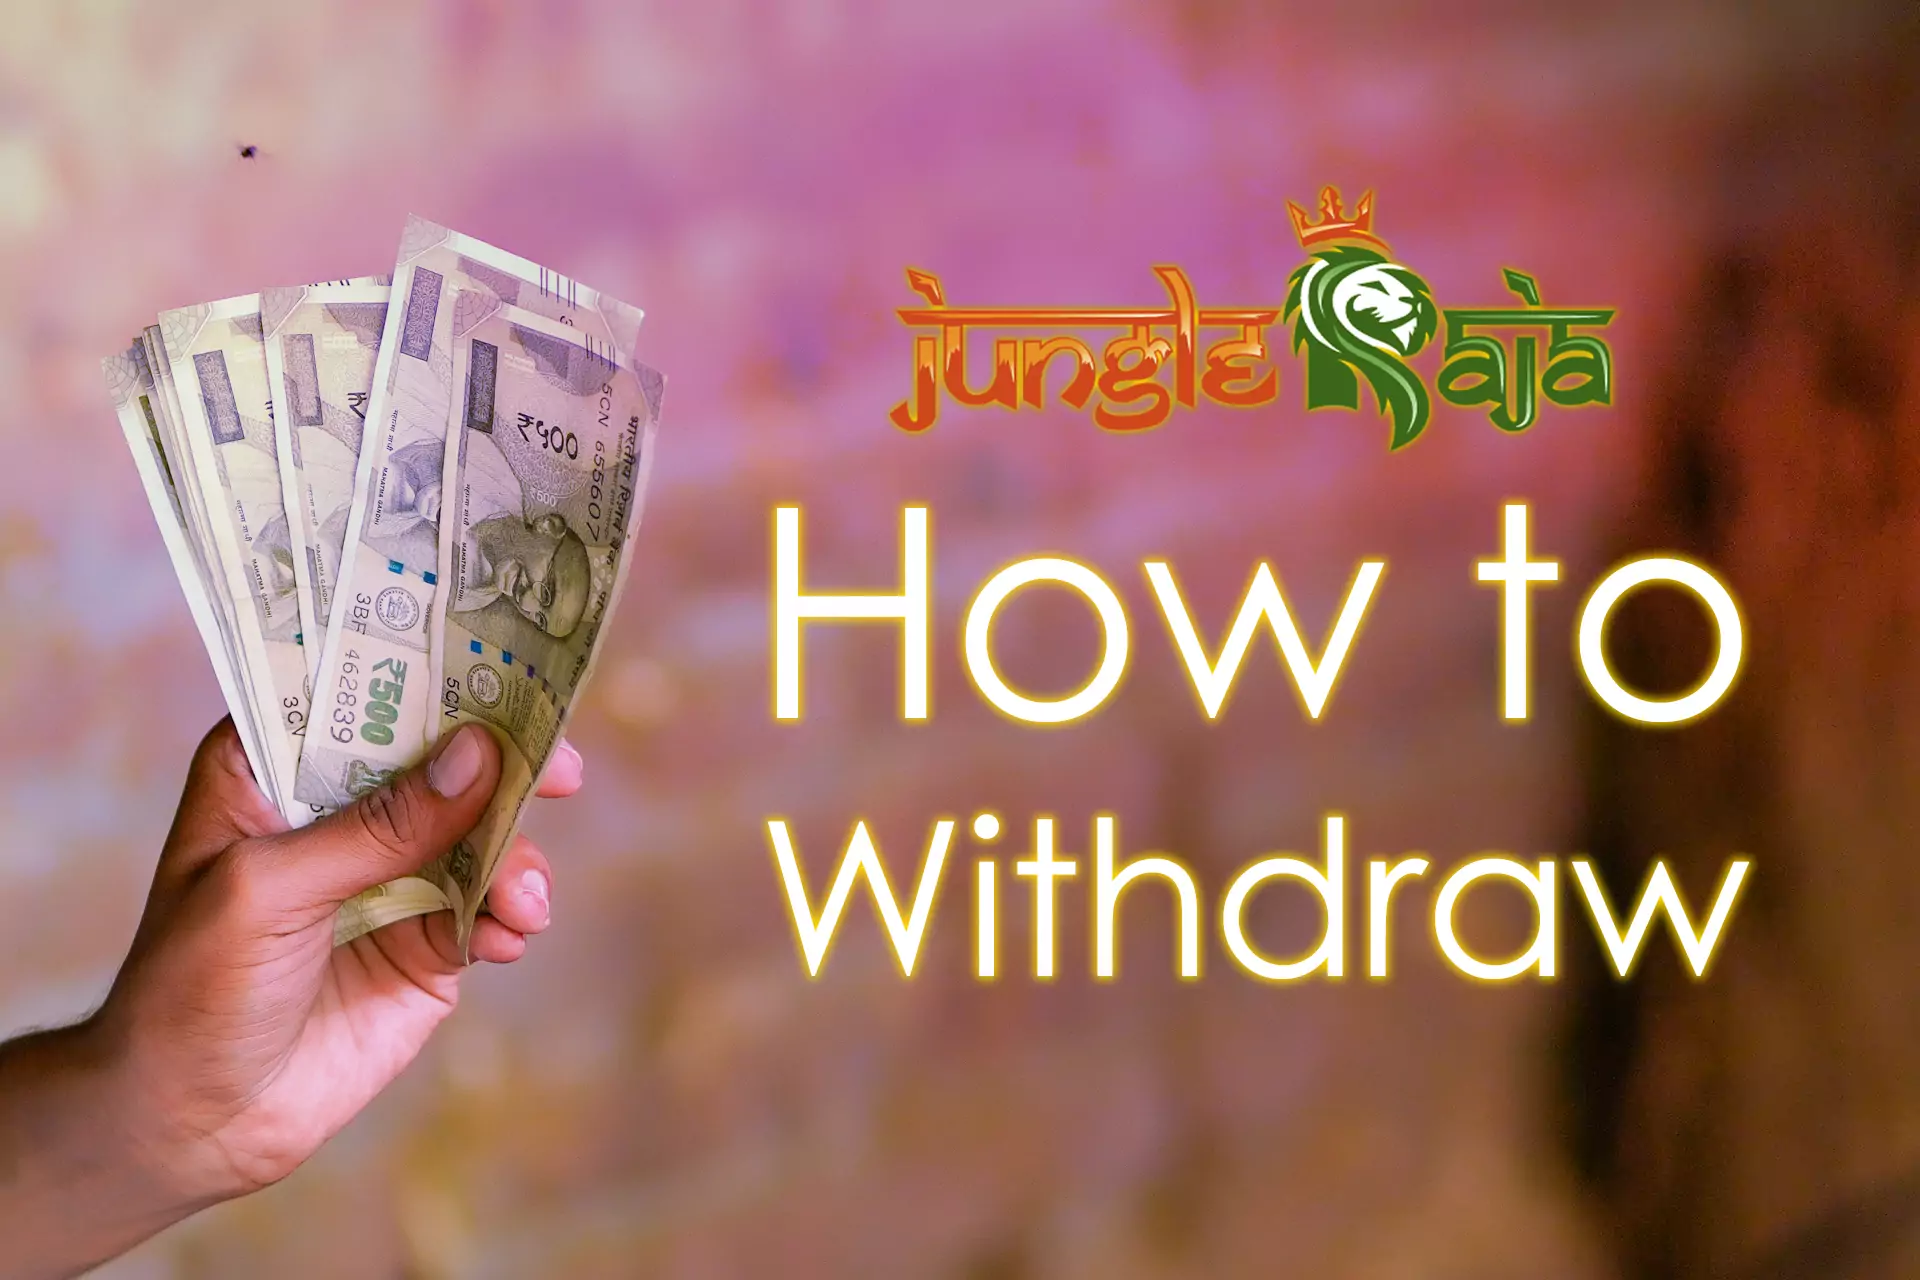 When you win playing casino games you should withdraw money to your e-wallet or bank card.